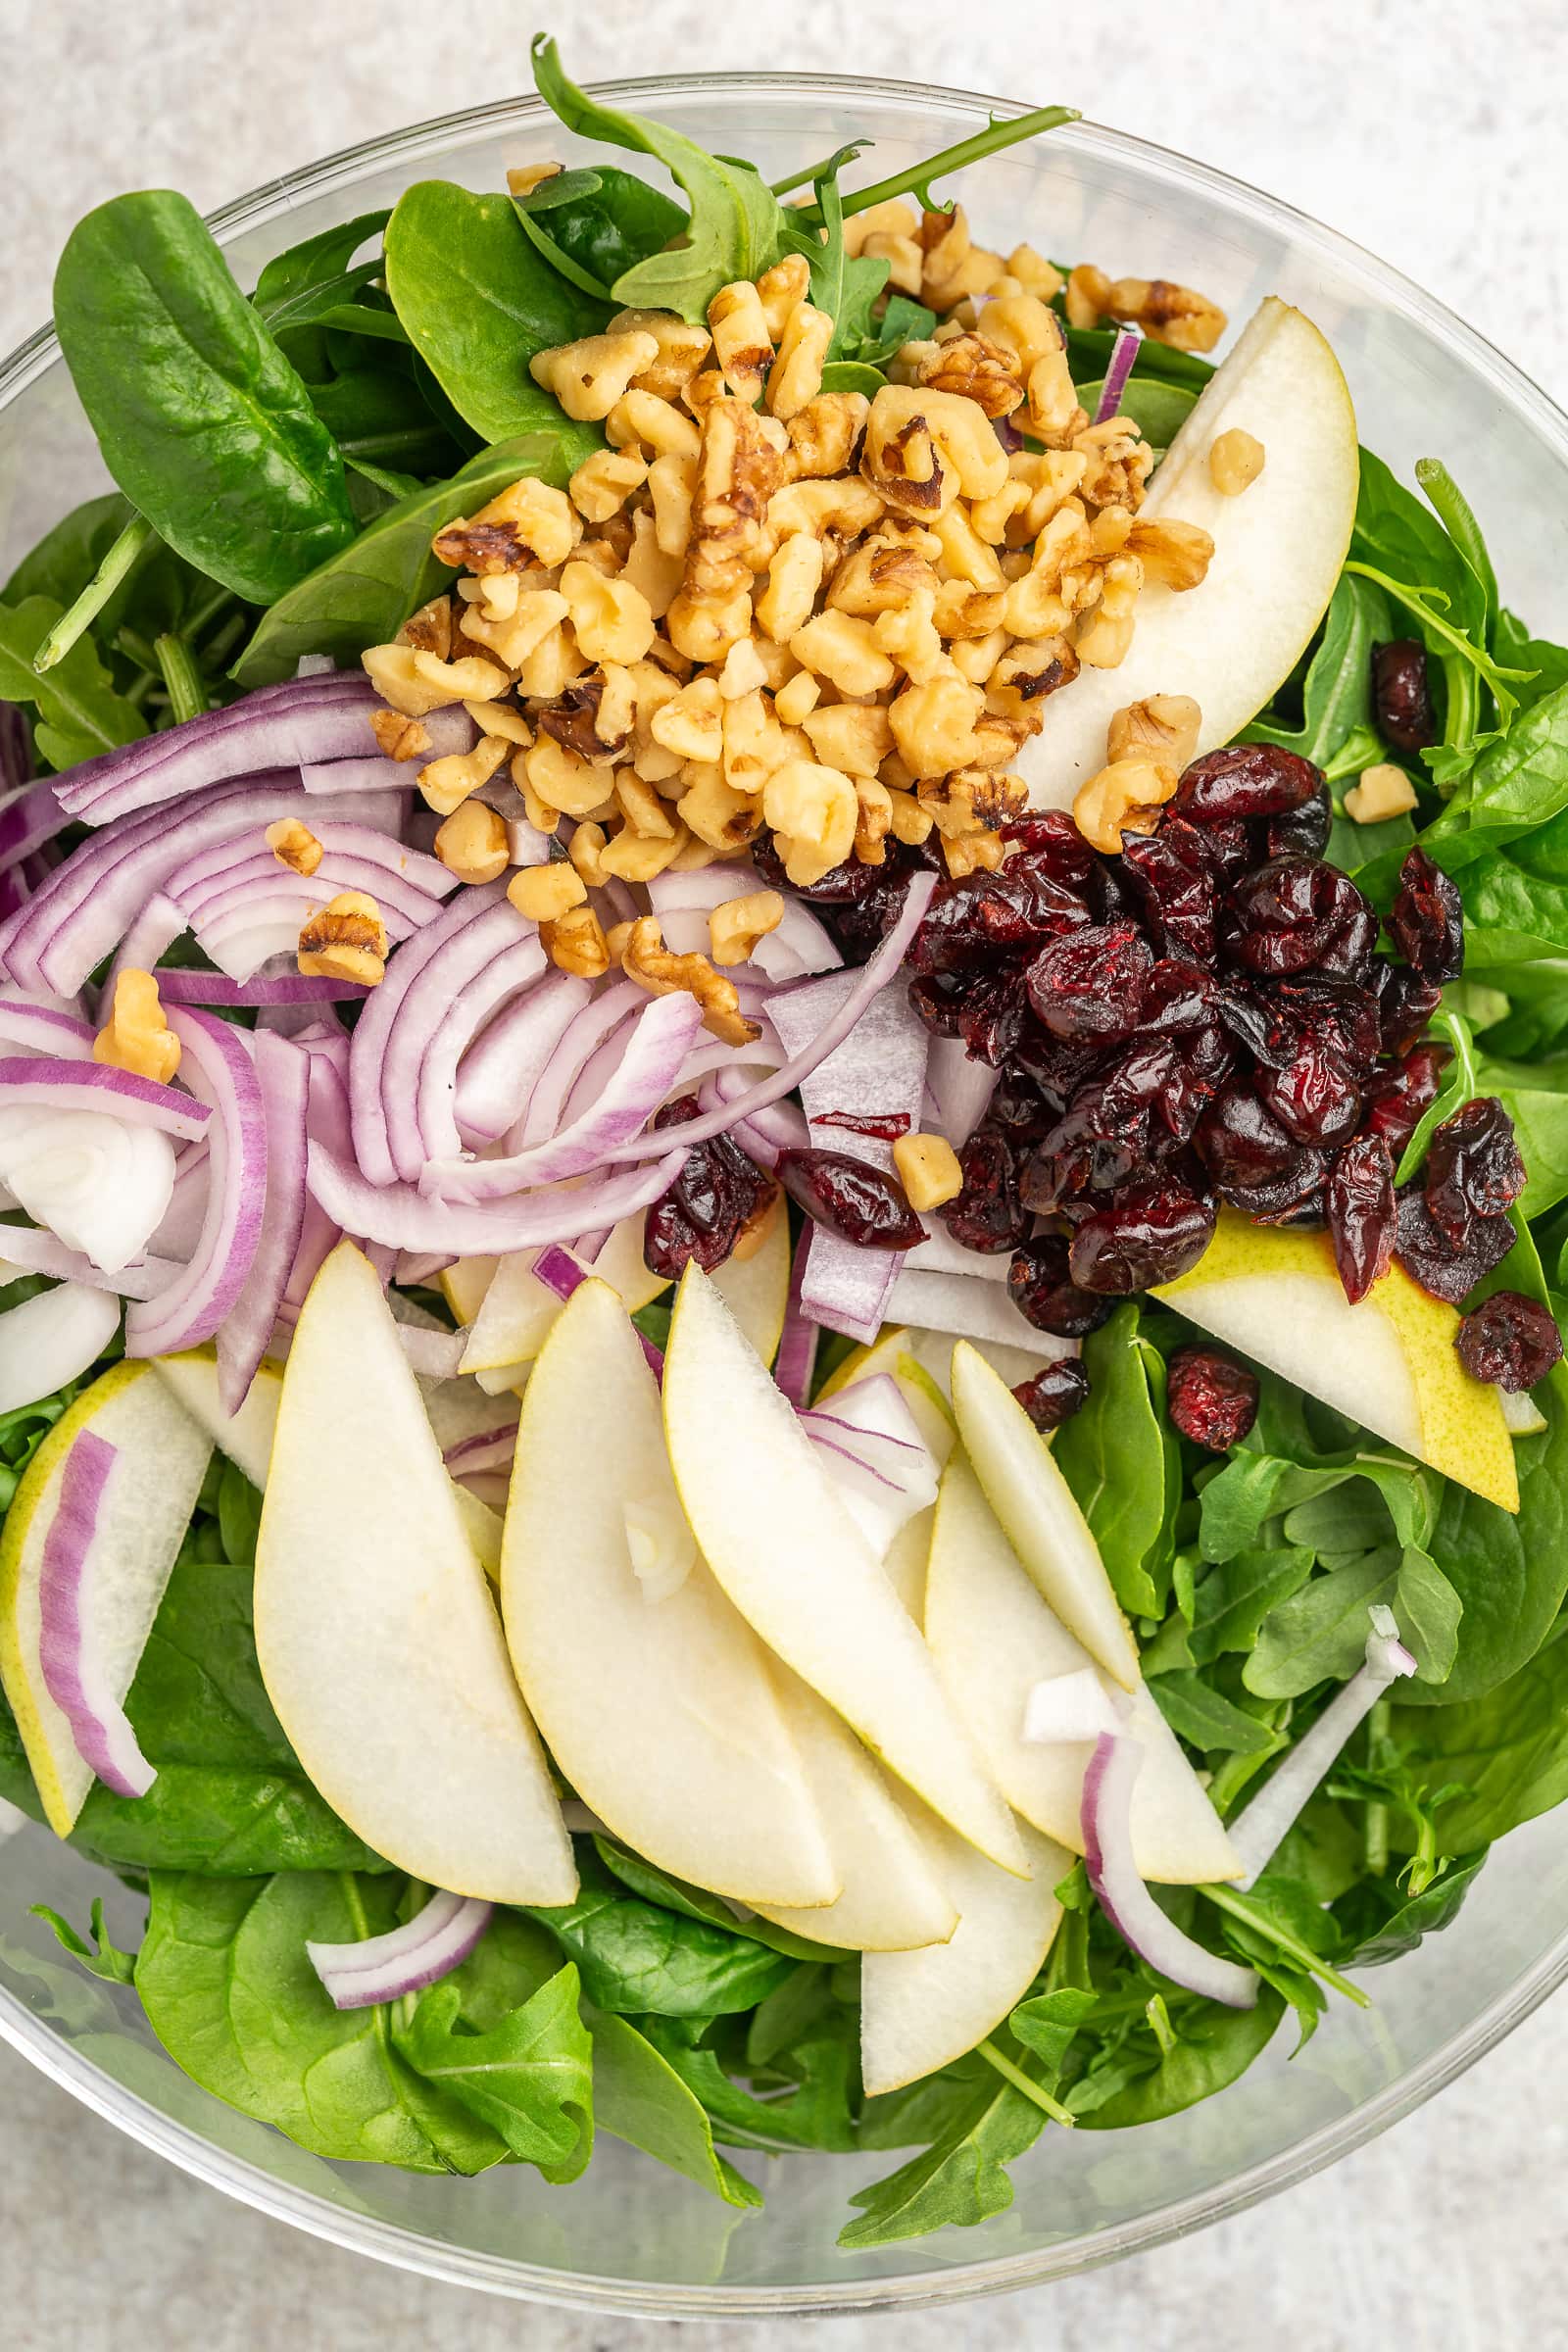 Arugula and baby spinach mixed together in a large bowl topped with pear slices, dried cranberries, walnuts, and red onion.